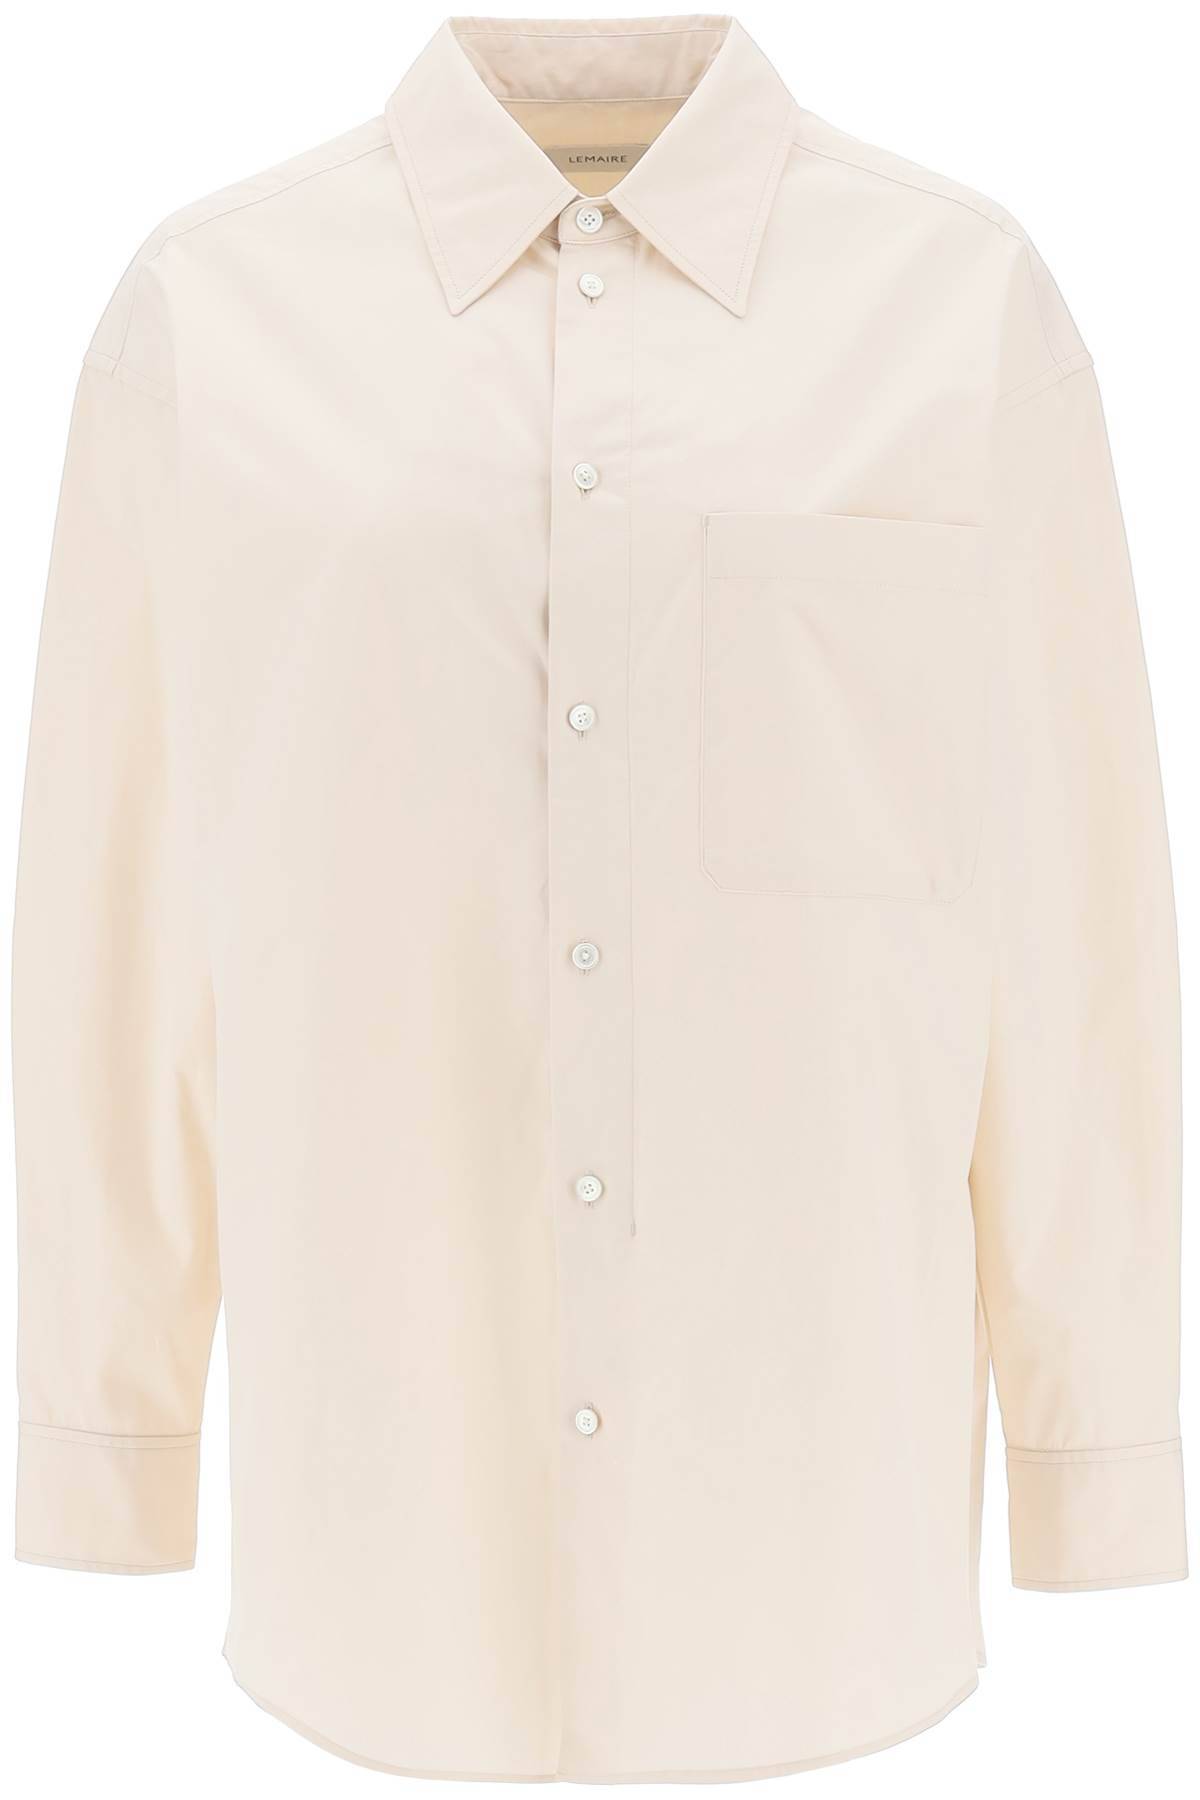 Lemaire LEMAIRE oversized shirt in poplin